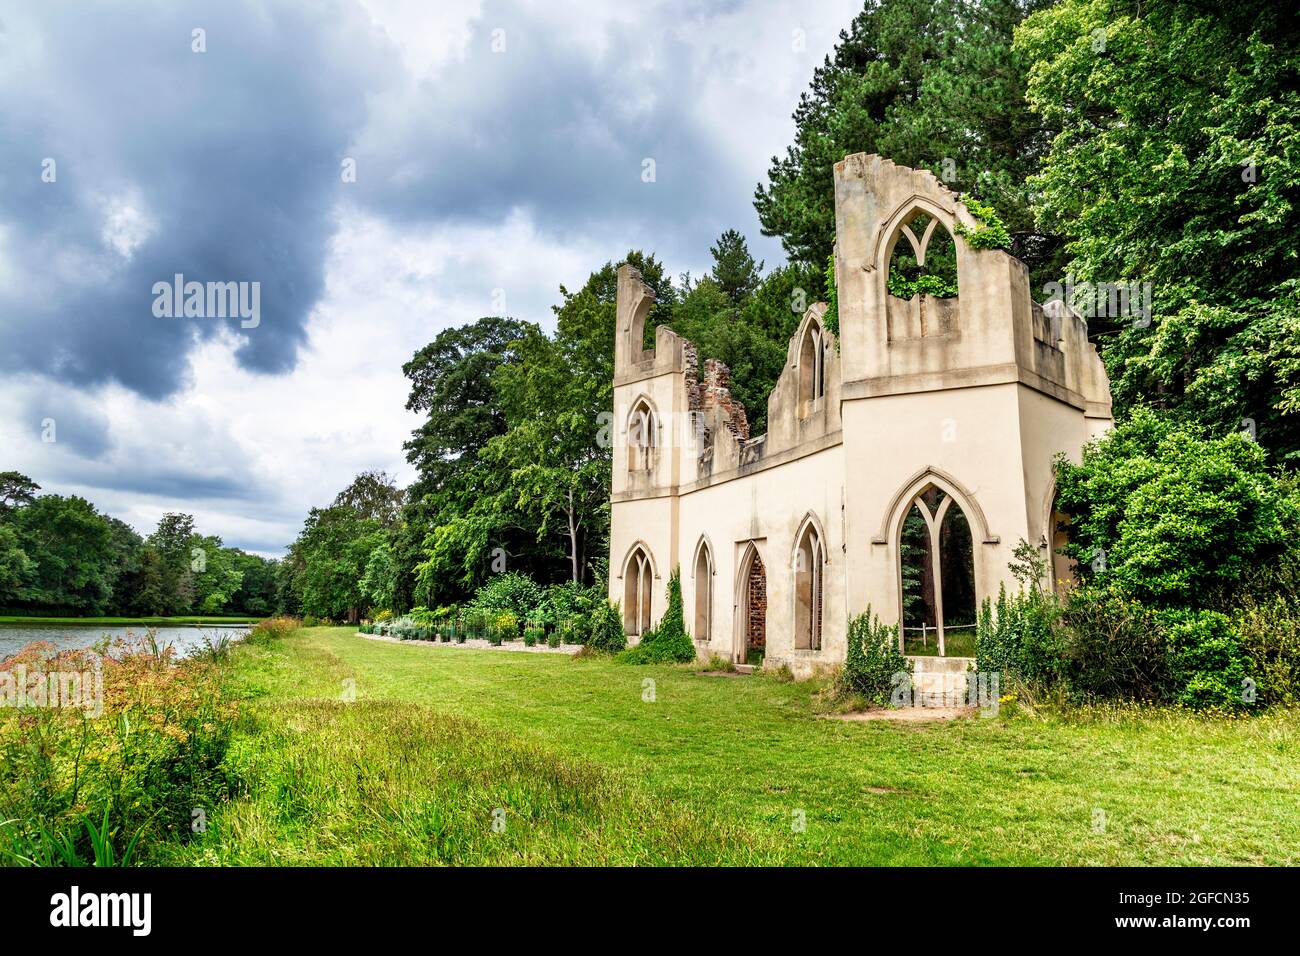 The Ruined Abbey - 18th century Gothic ruin at Painshill Park, Cobham, Surrey, UK Stock Photo